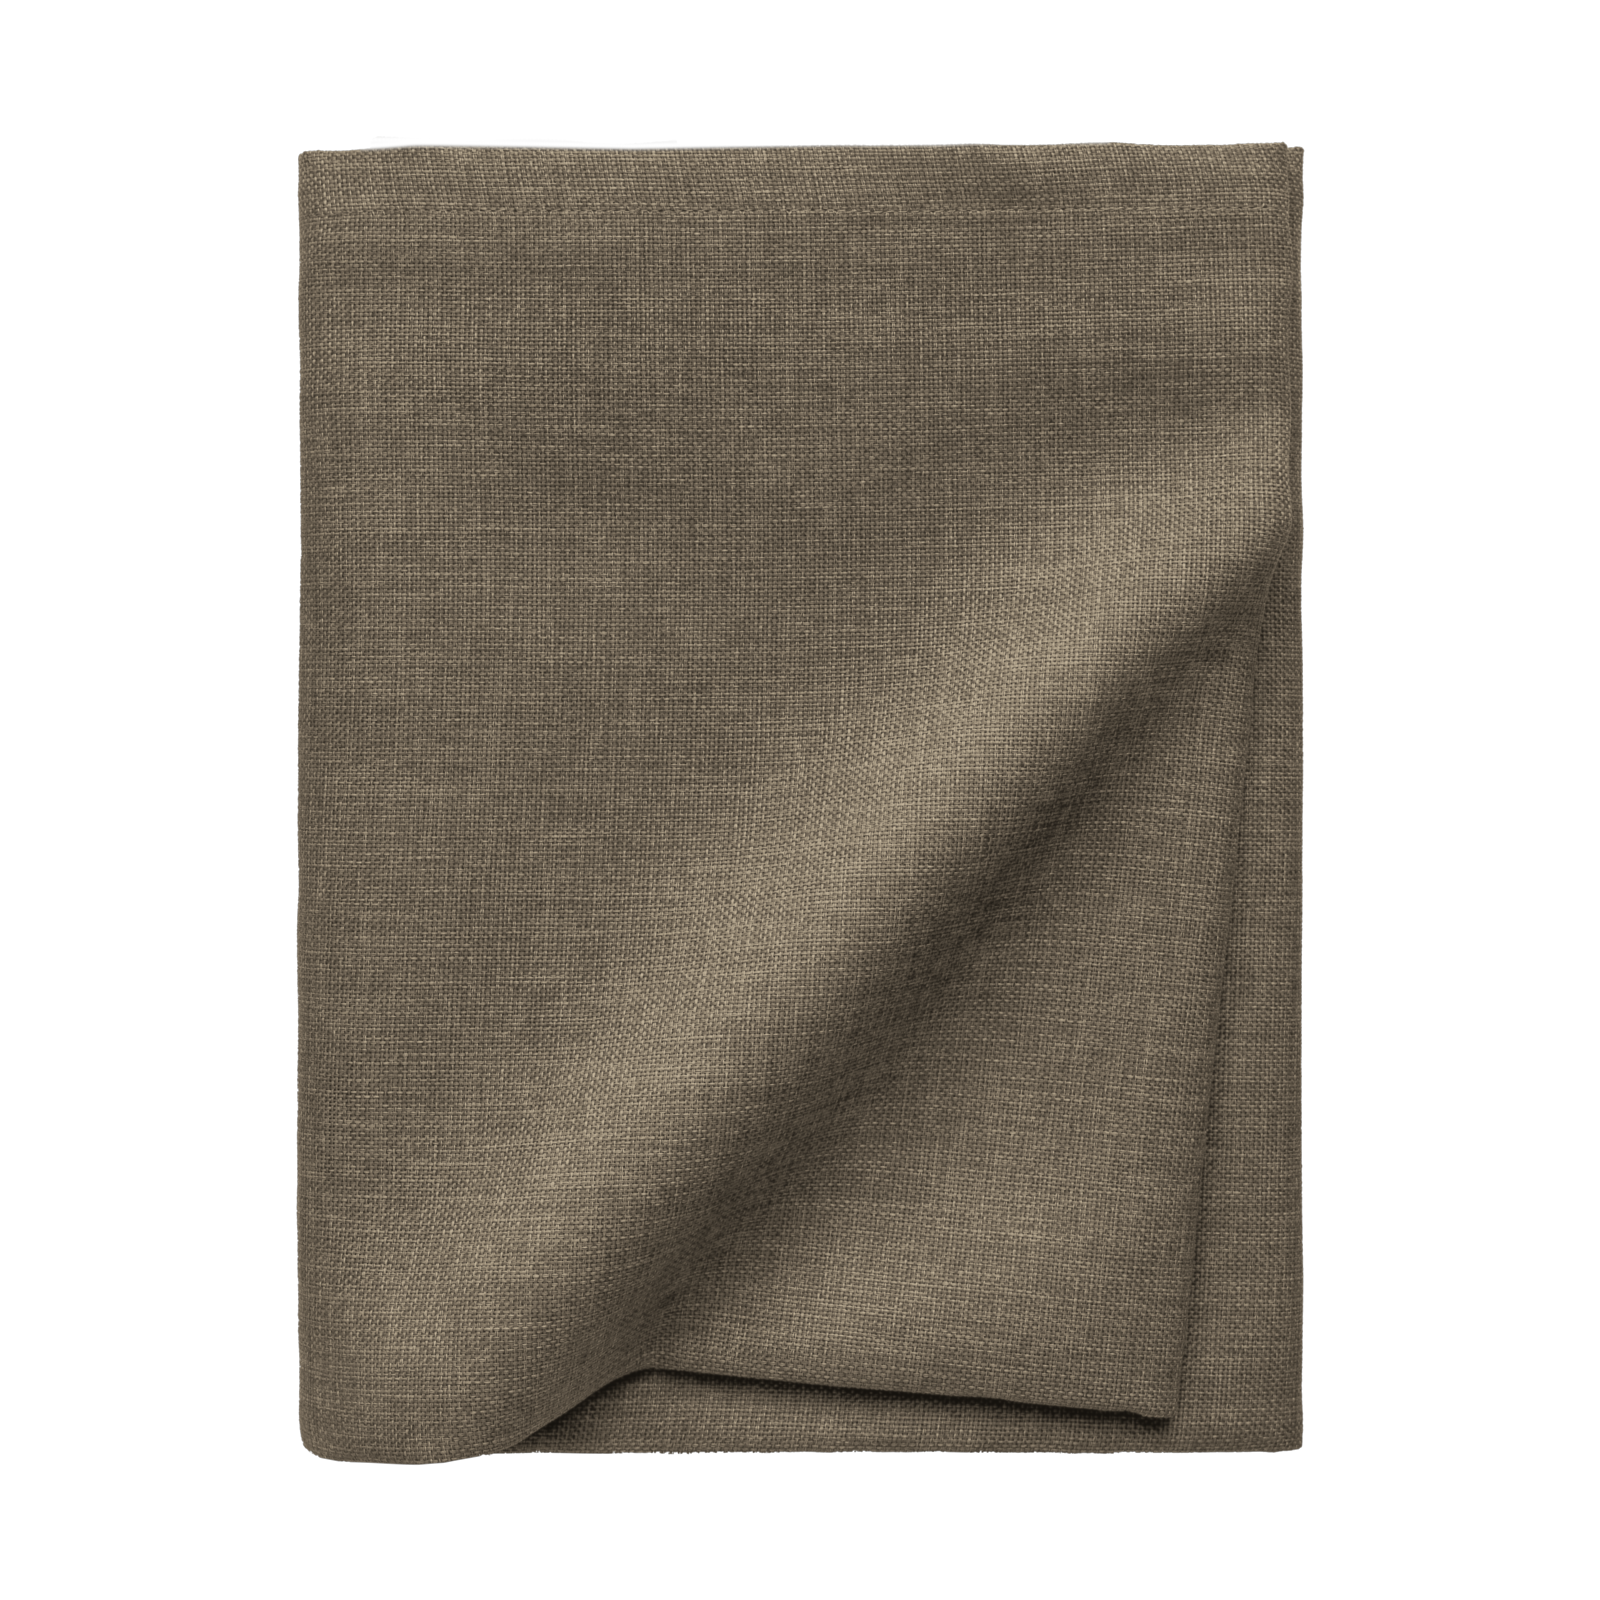 Größe: 150x 250 cm Farbe: taupe #farbe_taupe